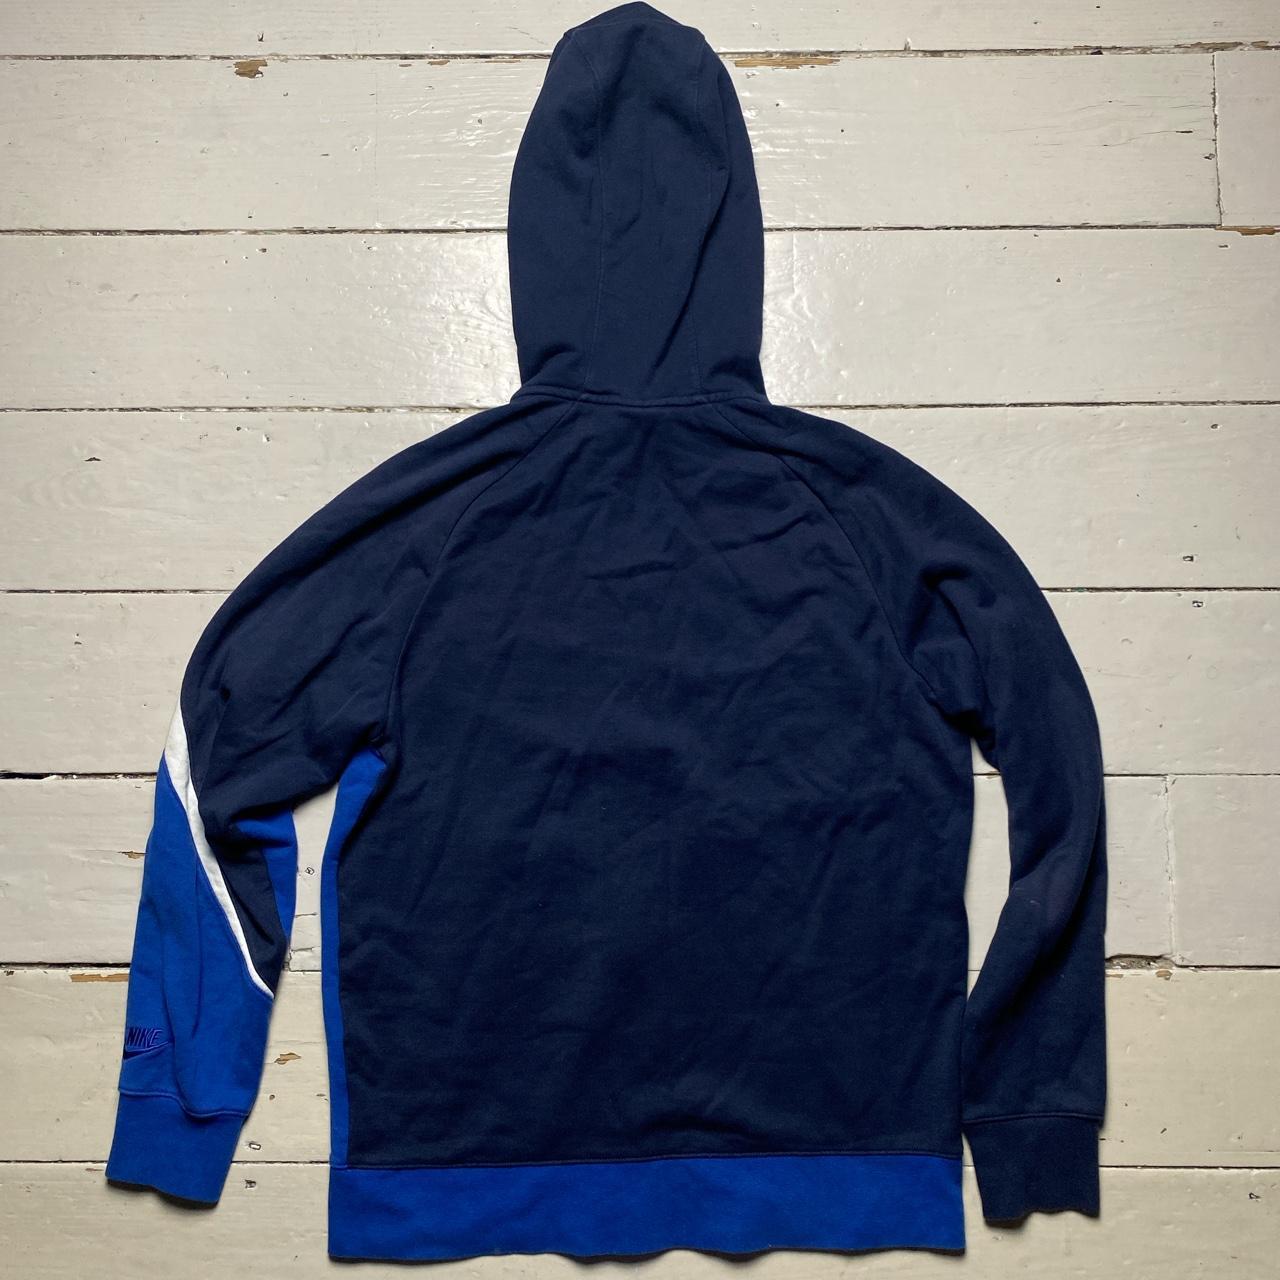 Nike Big Swoosh Tracksuit Navy Blue and White 🌊 In... - Depop